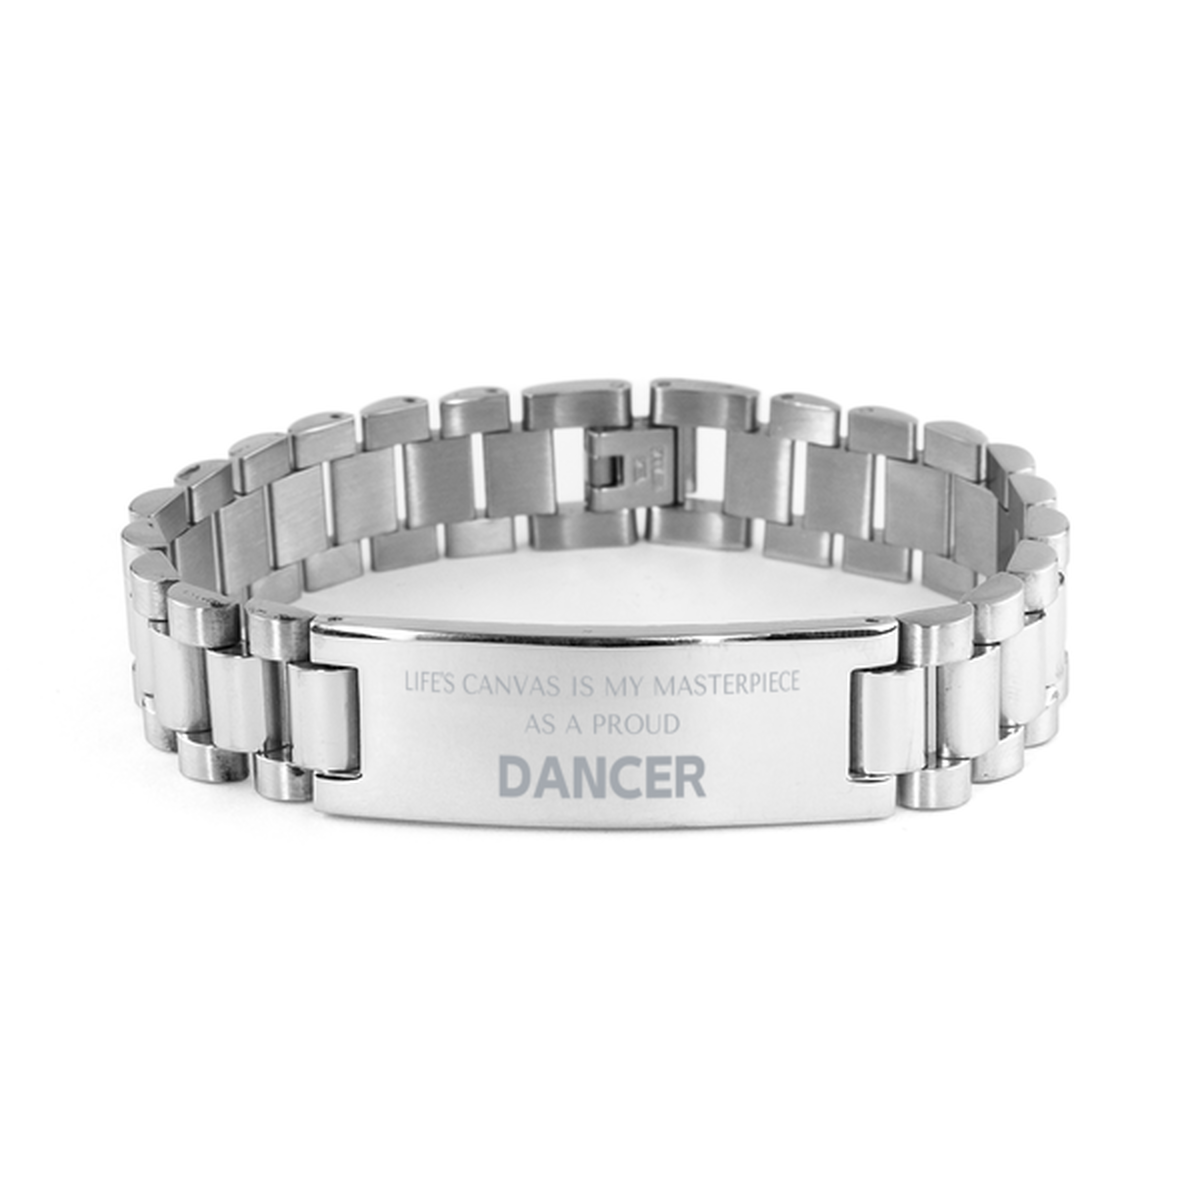 Proud Dancer Gifts, Life's canvas is my masterpiece, Epic Birthday Christmas Unique Ladder Stainless Steel Bracelet For Dancer, Coworkers, Men, Women, Friends